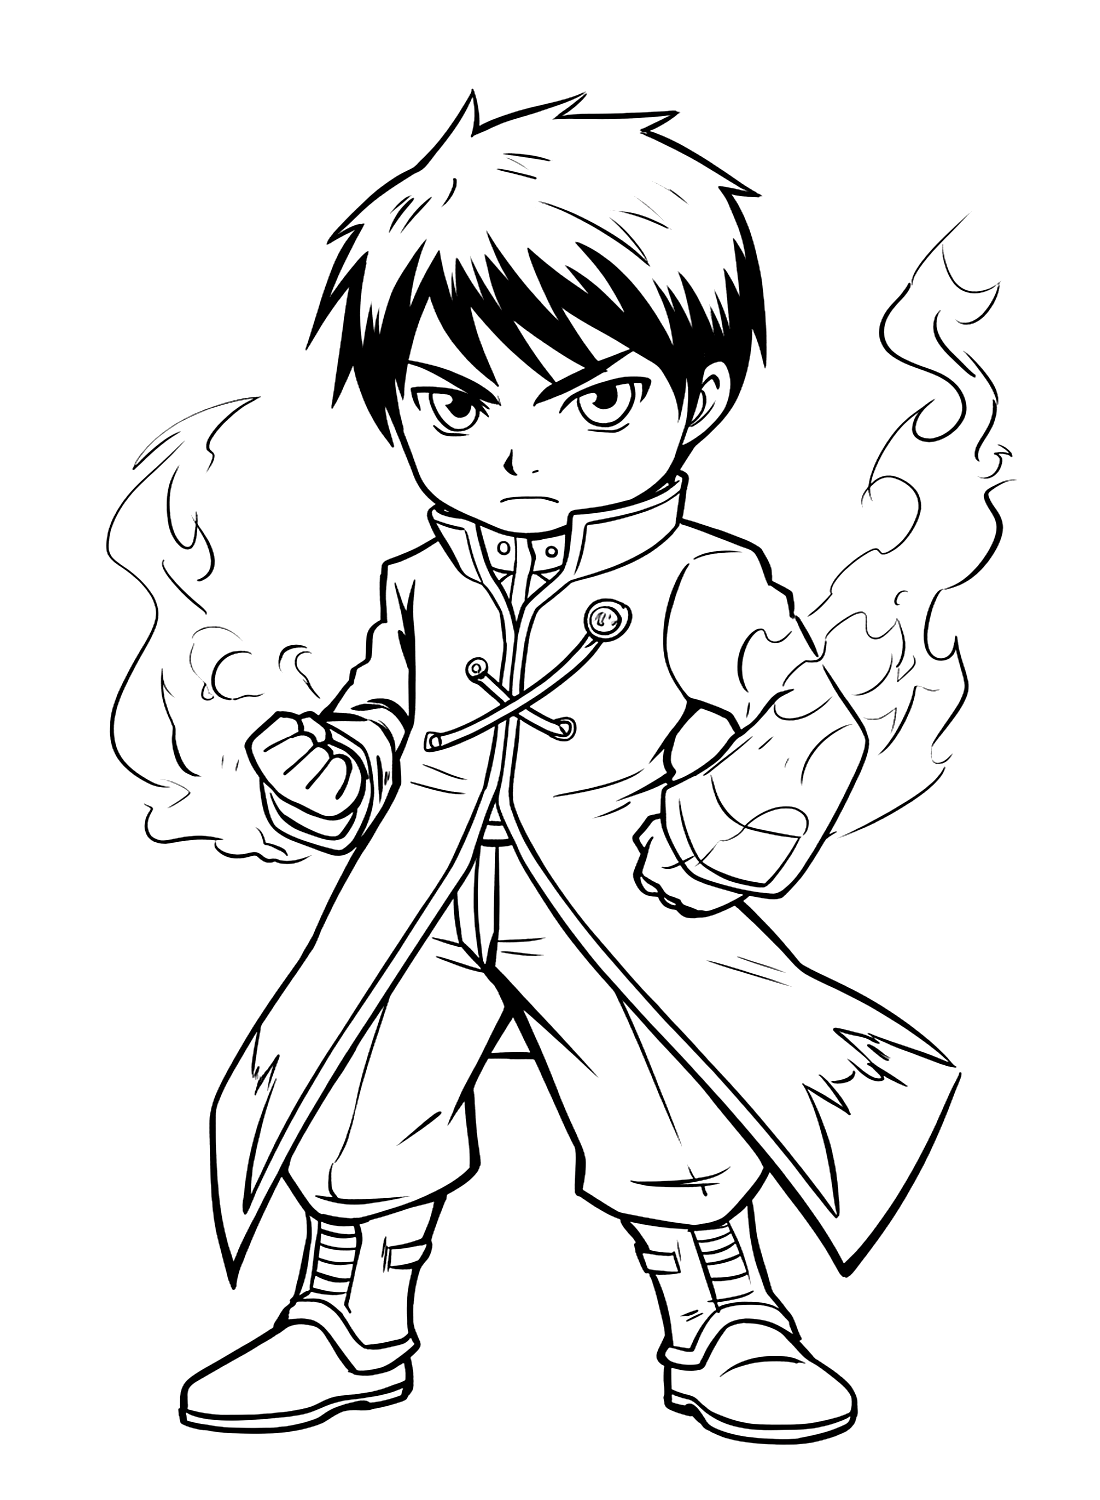 Roy Mustang Coloring Page Online from Roy Mustang